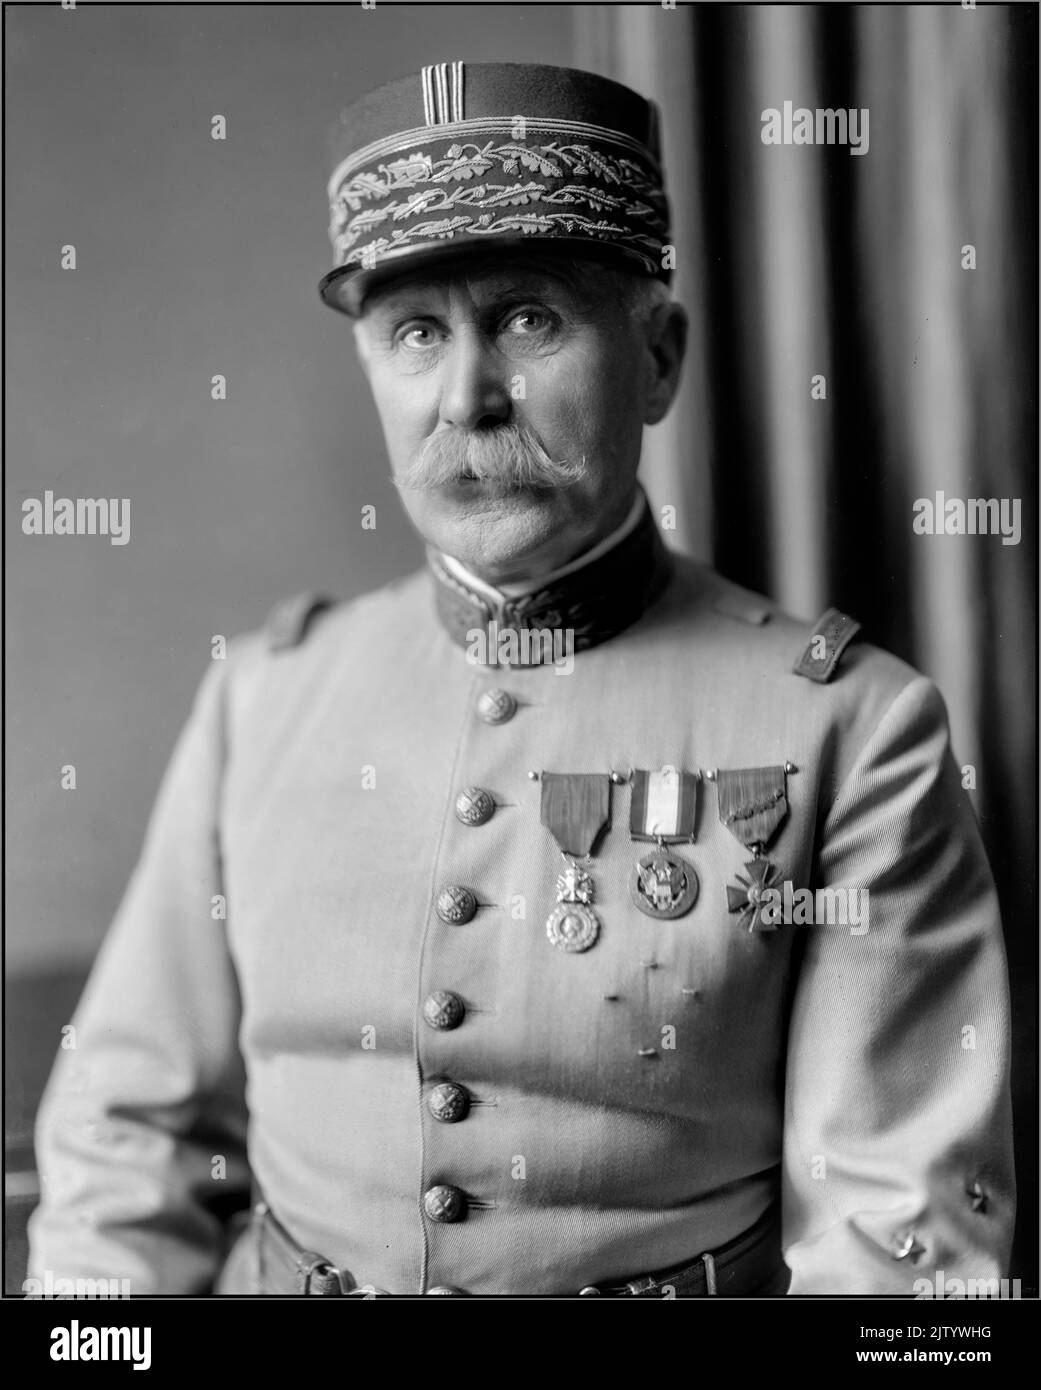 PETAIN Henri Philippe Benoni Omer Pétain (24 April 1856 – 23 July 1951), commonly known as Philippe Pétain or Marshal Pétain 1900s Portrait Maréchal Pétain a French general who attained the position of Marshal of France at the end of World War I, during which he became known as The Lion of Verdun  From 1940 to 1944, during World War II, he served as head of the Nazi collaborationist regime of Vichy France. Pétain,, HENRI P. MARSHALL Portrait Military Uniform Date 1905 France Stock Photo